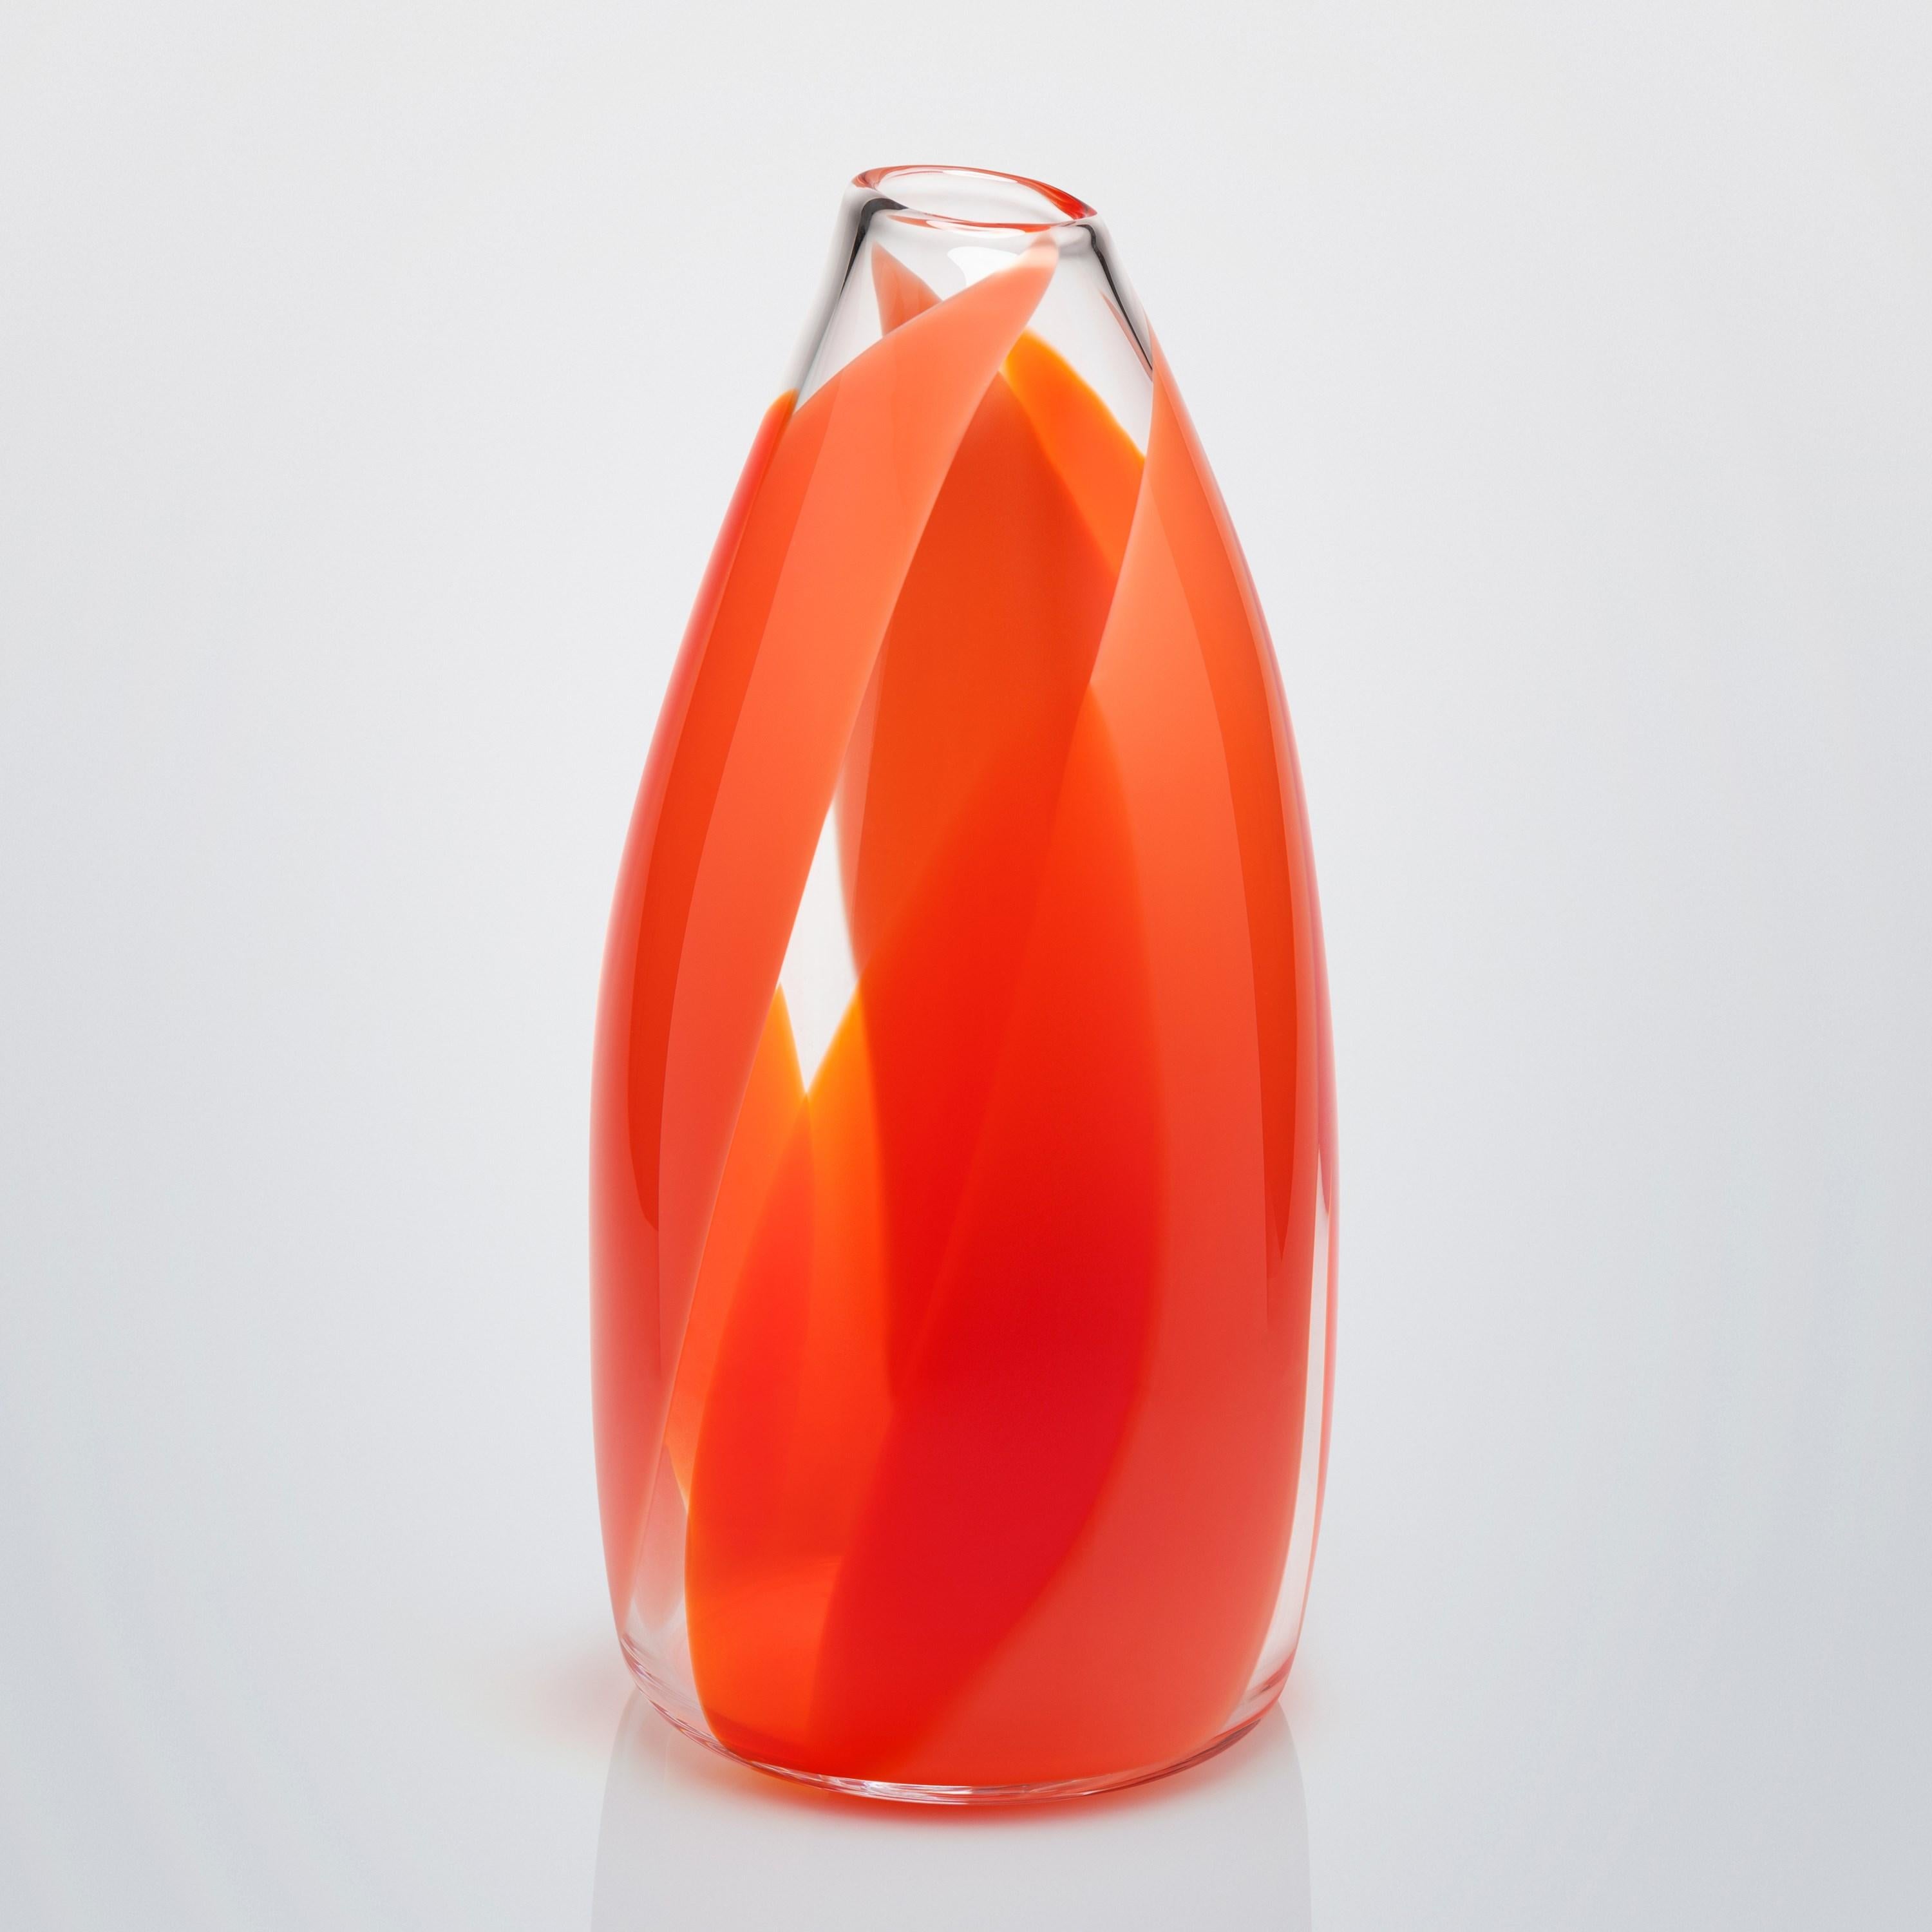 'Waves No 491' is a handblown glass vase by the British artist, Neil Wilkin.

'Waves' is a collection of beautifully crafted, unique glass bowls and centrepieces by the British artist Neil Wilkin. Taking a painterly approach, Neil Wilkin merges his